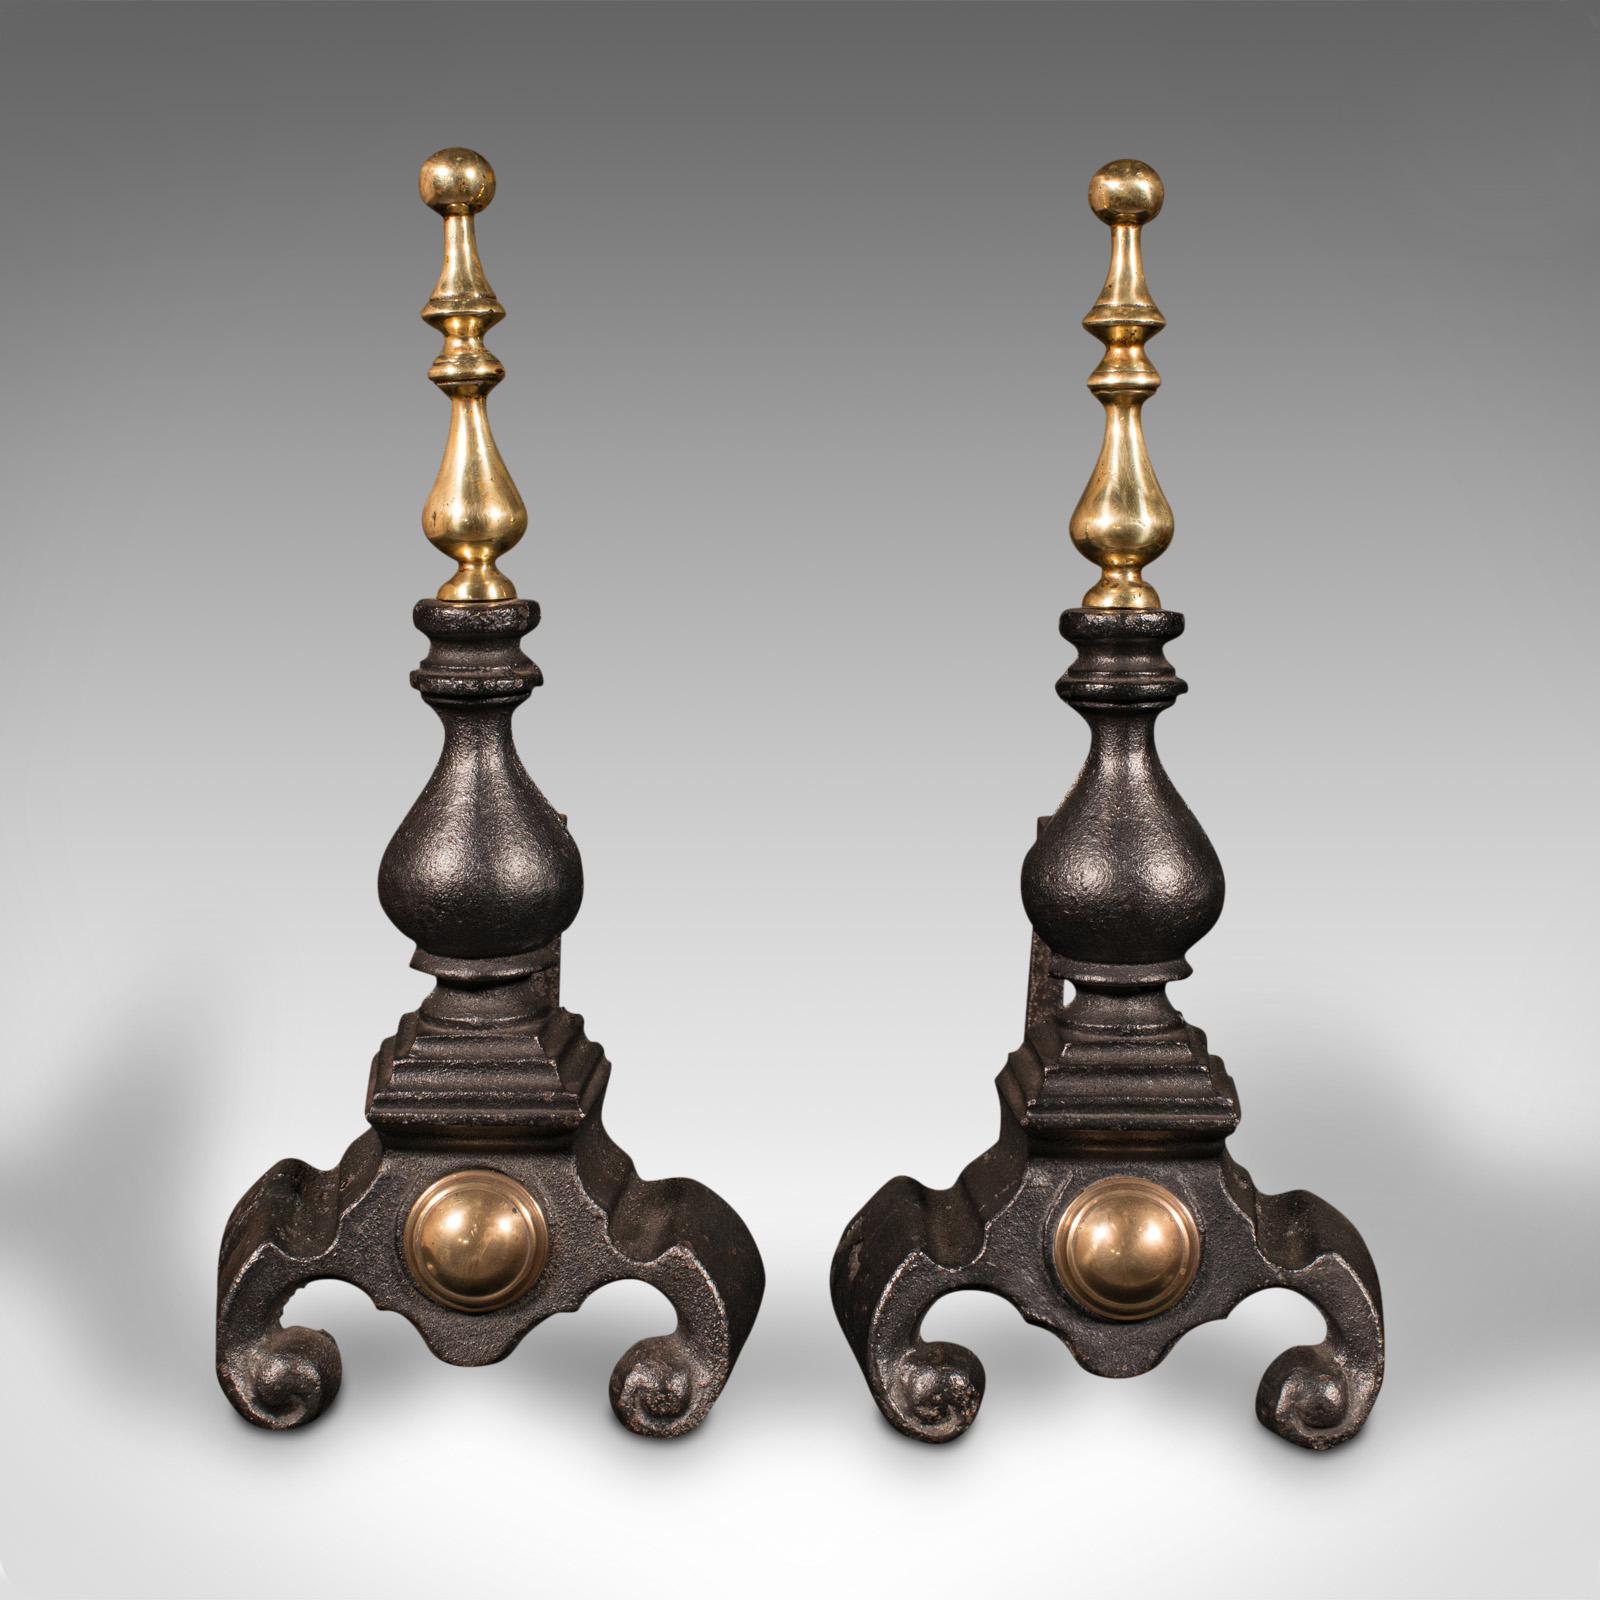 This is a pair of antique fireside tool rests. An English, cast iron and brass decorative andiron or fire dog, dating to the late Victorian period, circa 1900.

Substantial and attractive rests ideal for the fireside
Displaying a desirable aged